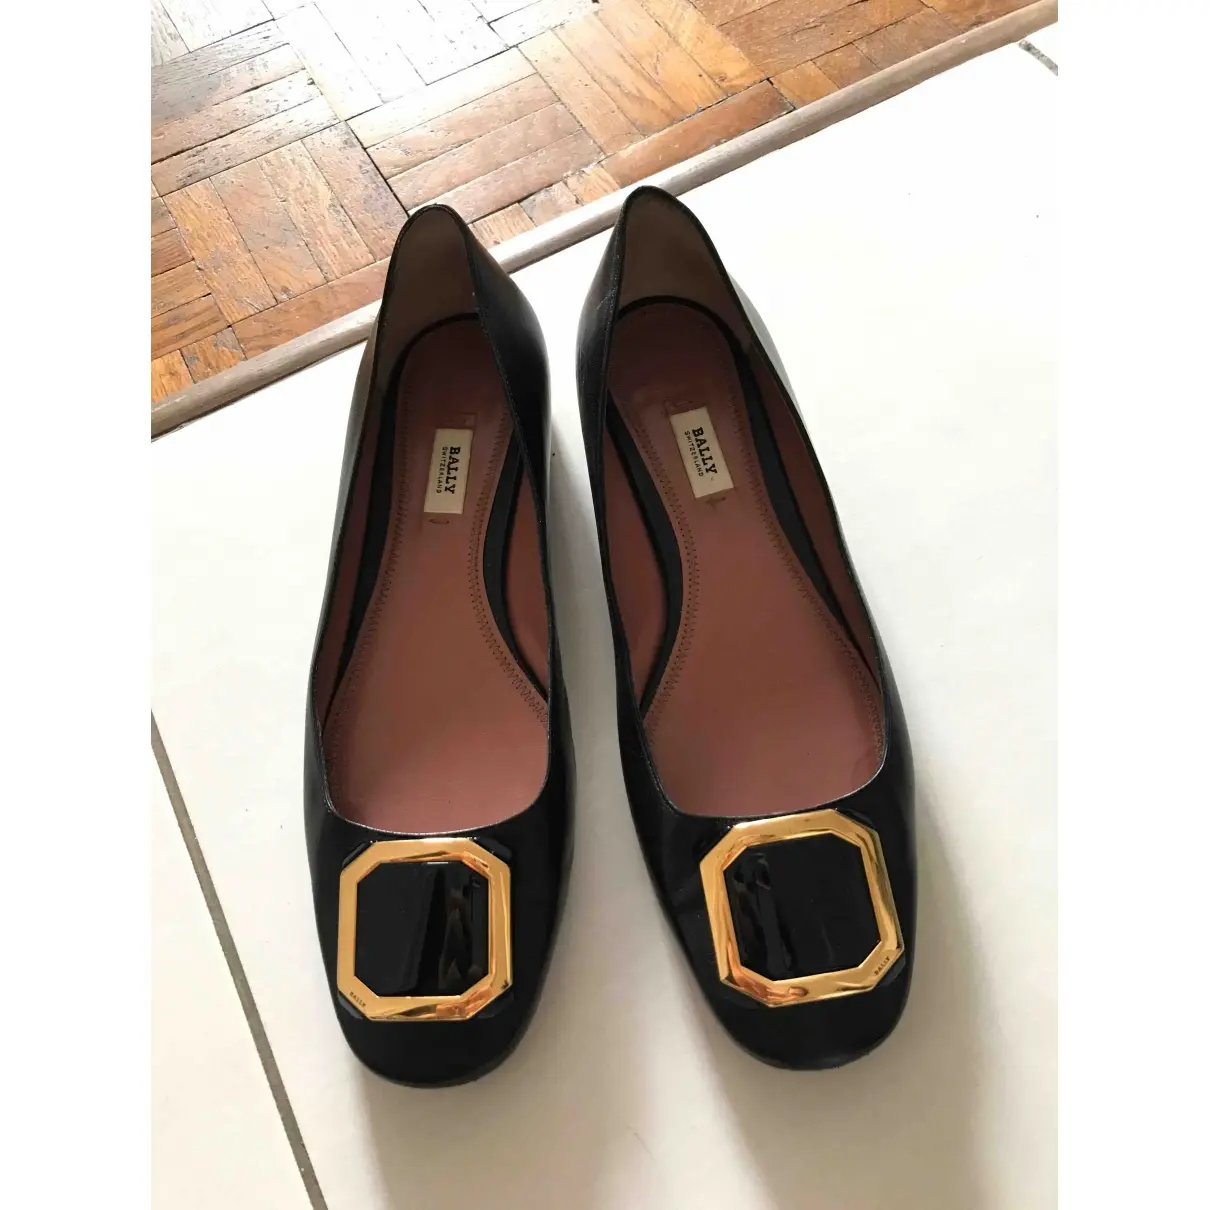 Buy Bally Leather ballet flats online